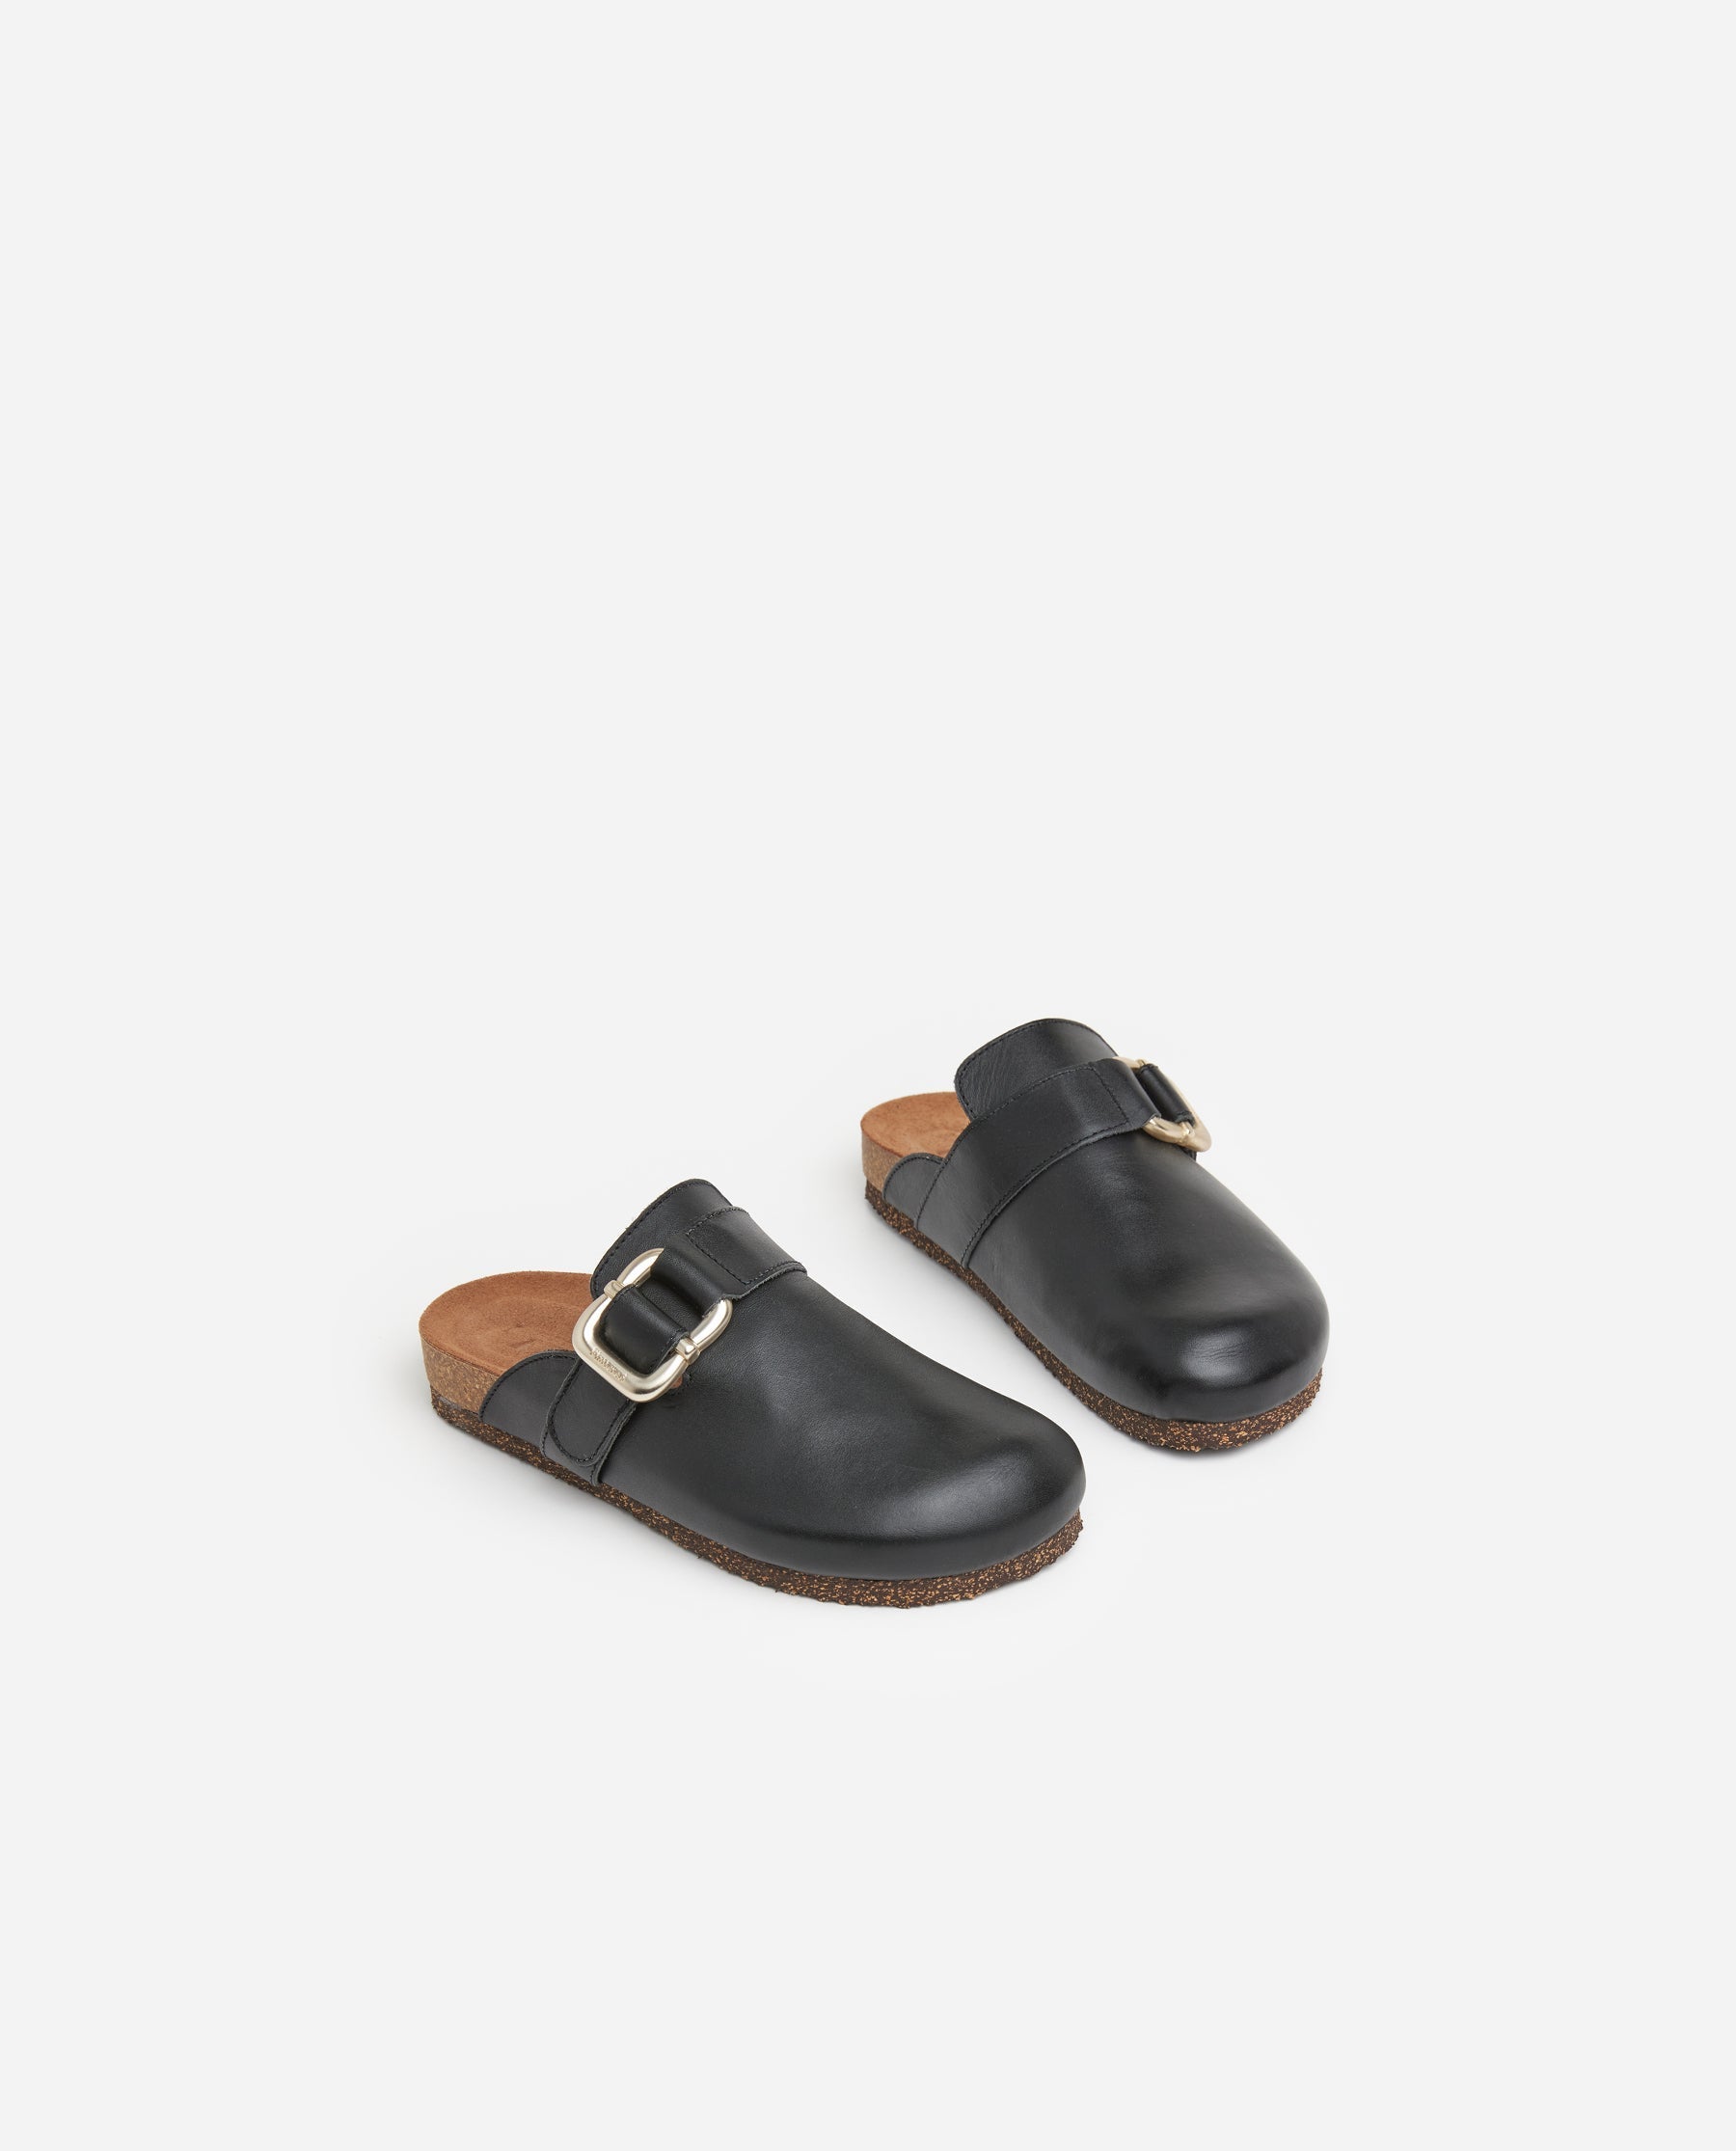 Cara Leather Black-Schuhe-Flattered-OUTLET-ARCHIVIST-ARCHIVE-SALE